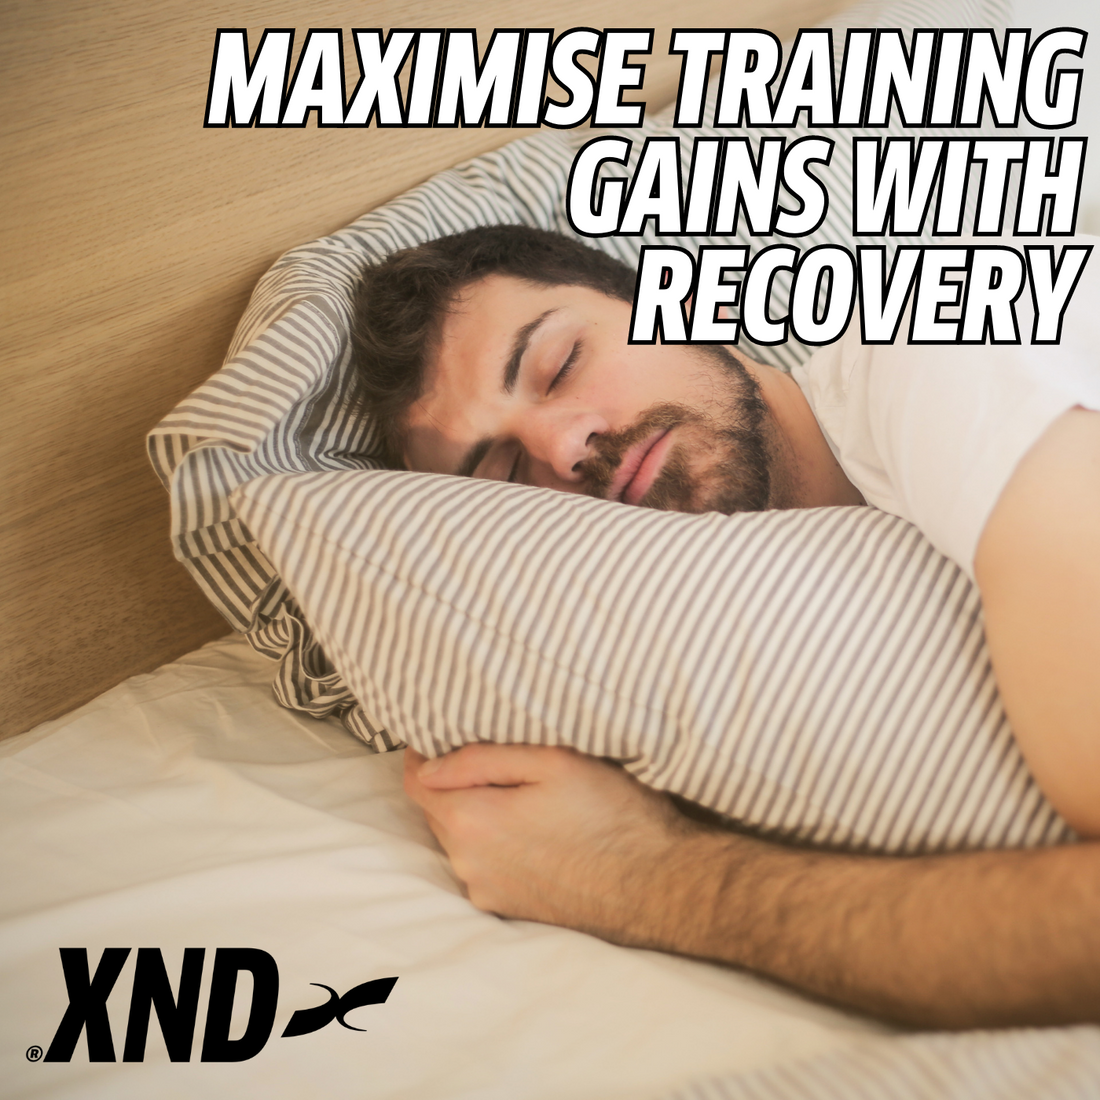 Maximise Training Gains With Recovery